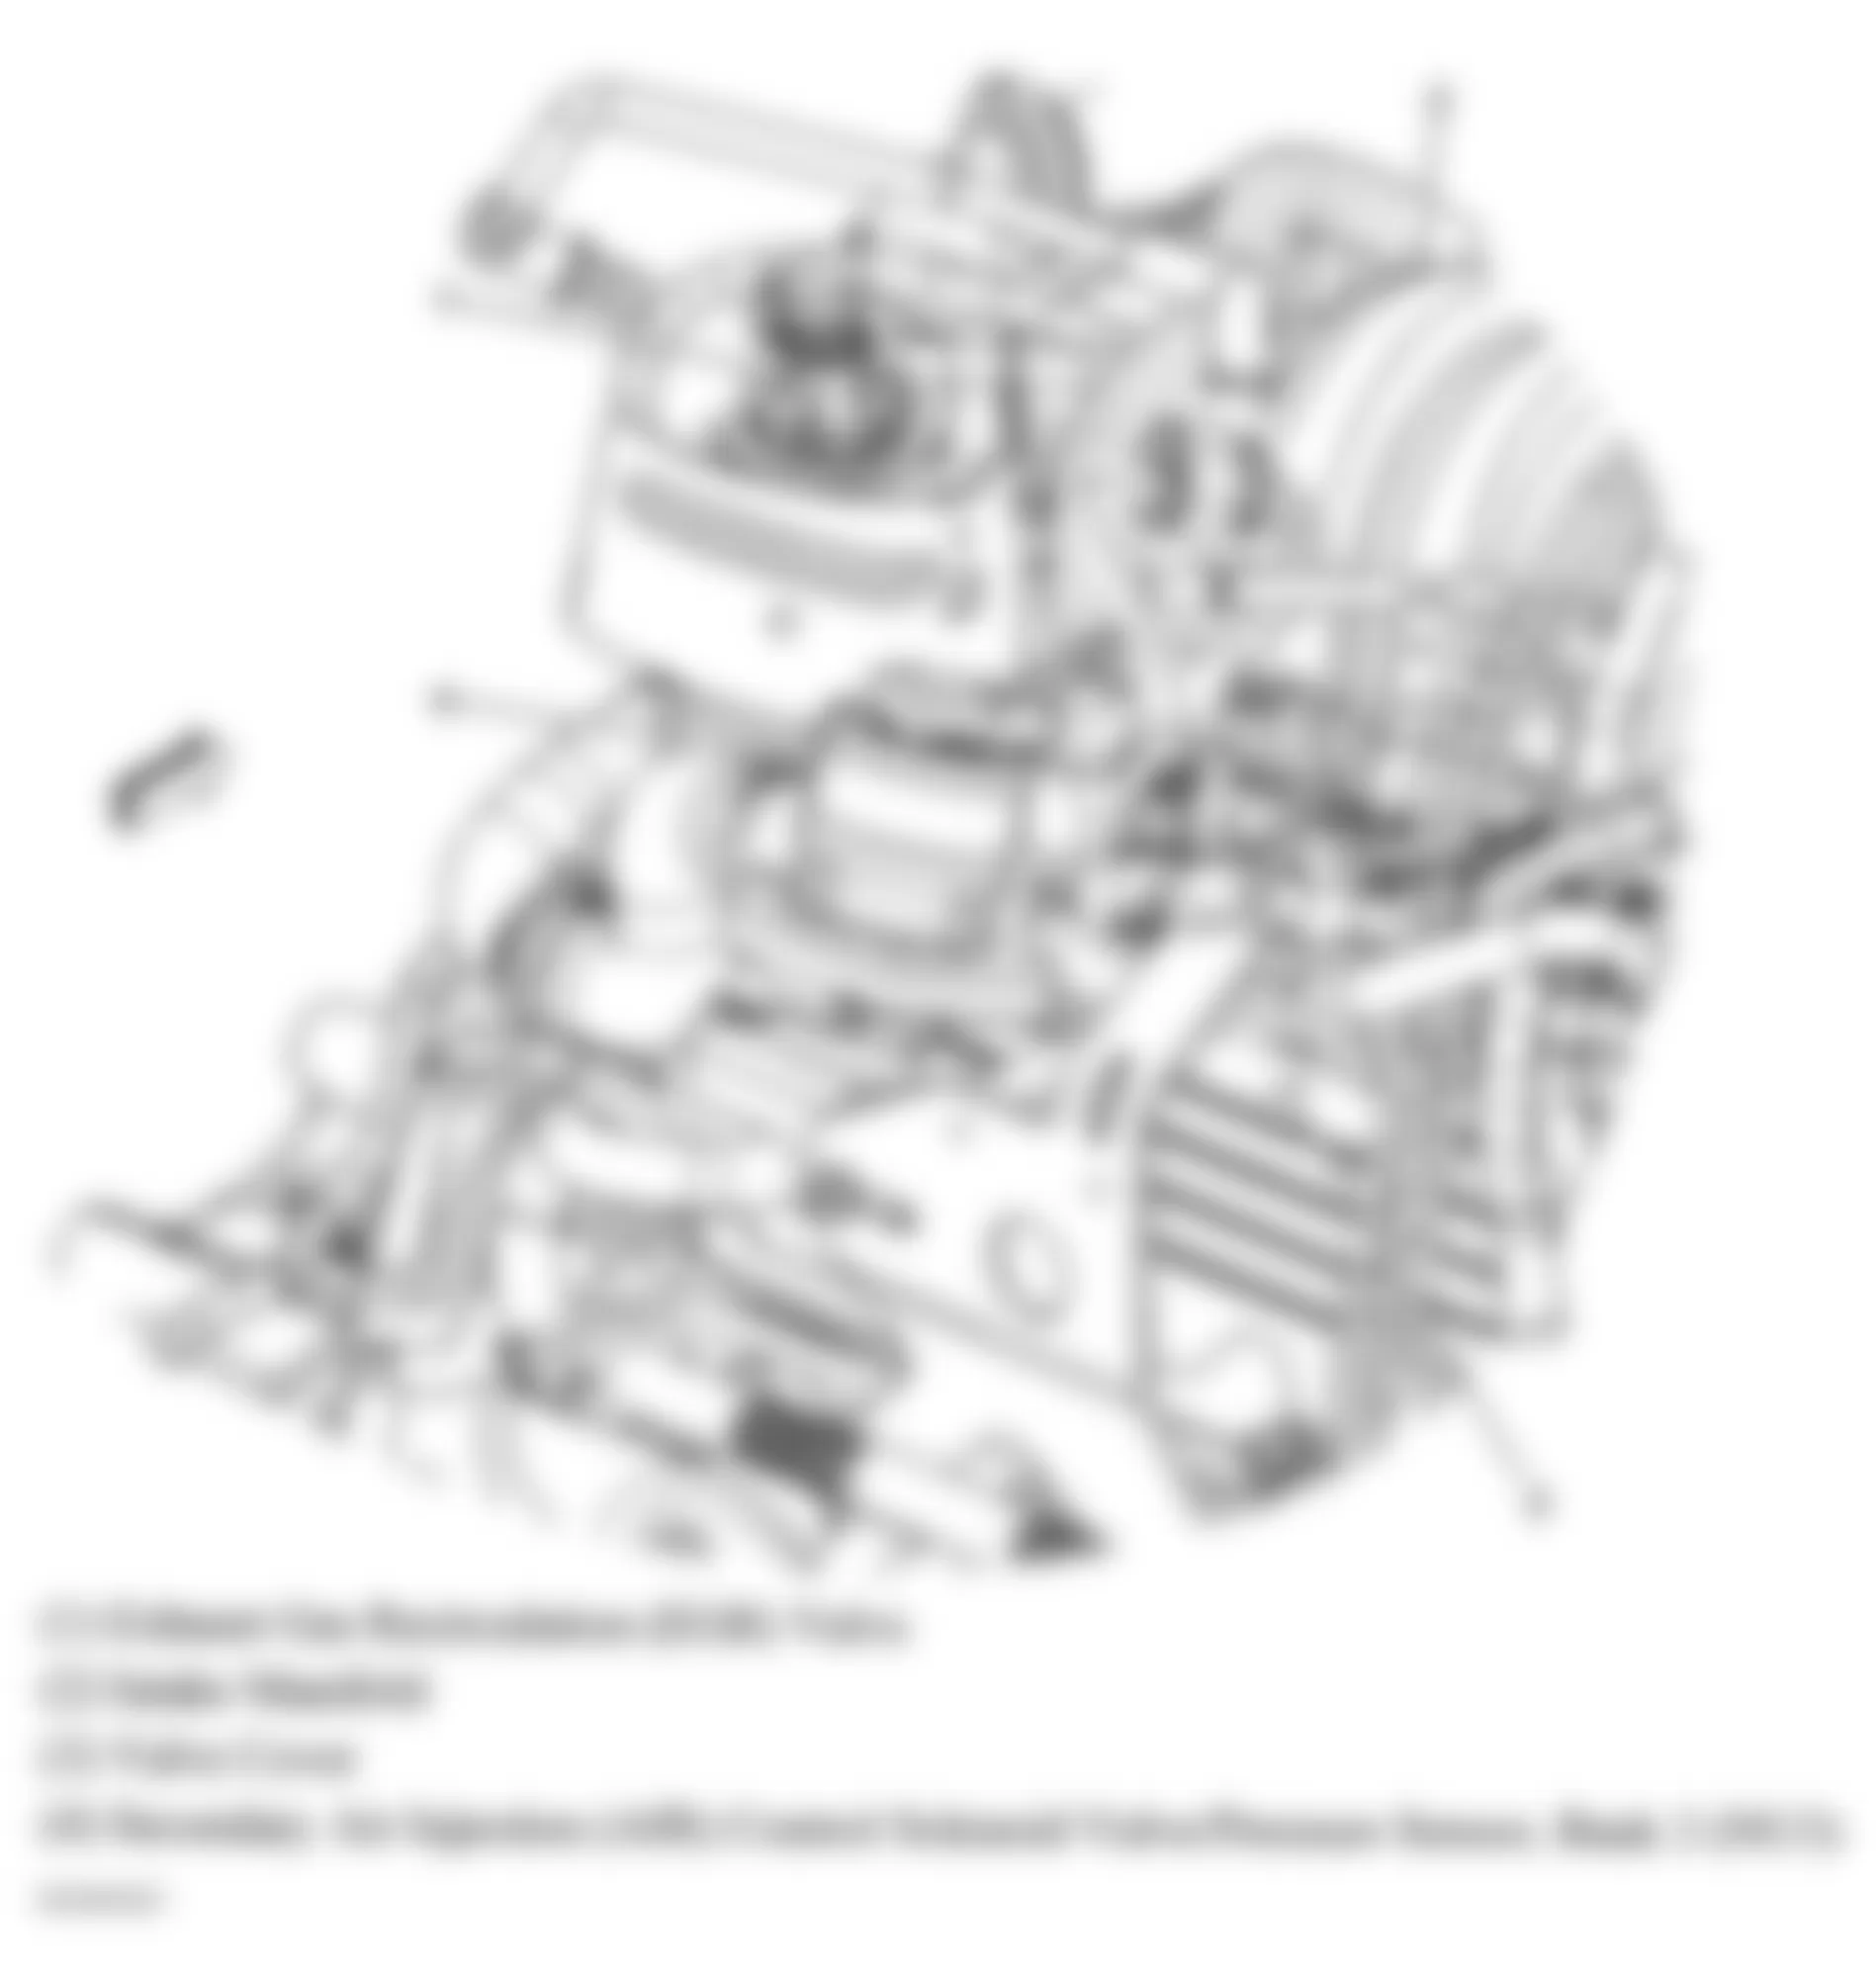 Buick LaCrosse CX 2005 - Component Locations -  Upper Rear Of Engine (3.8L)